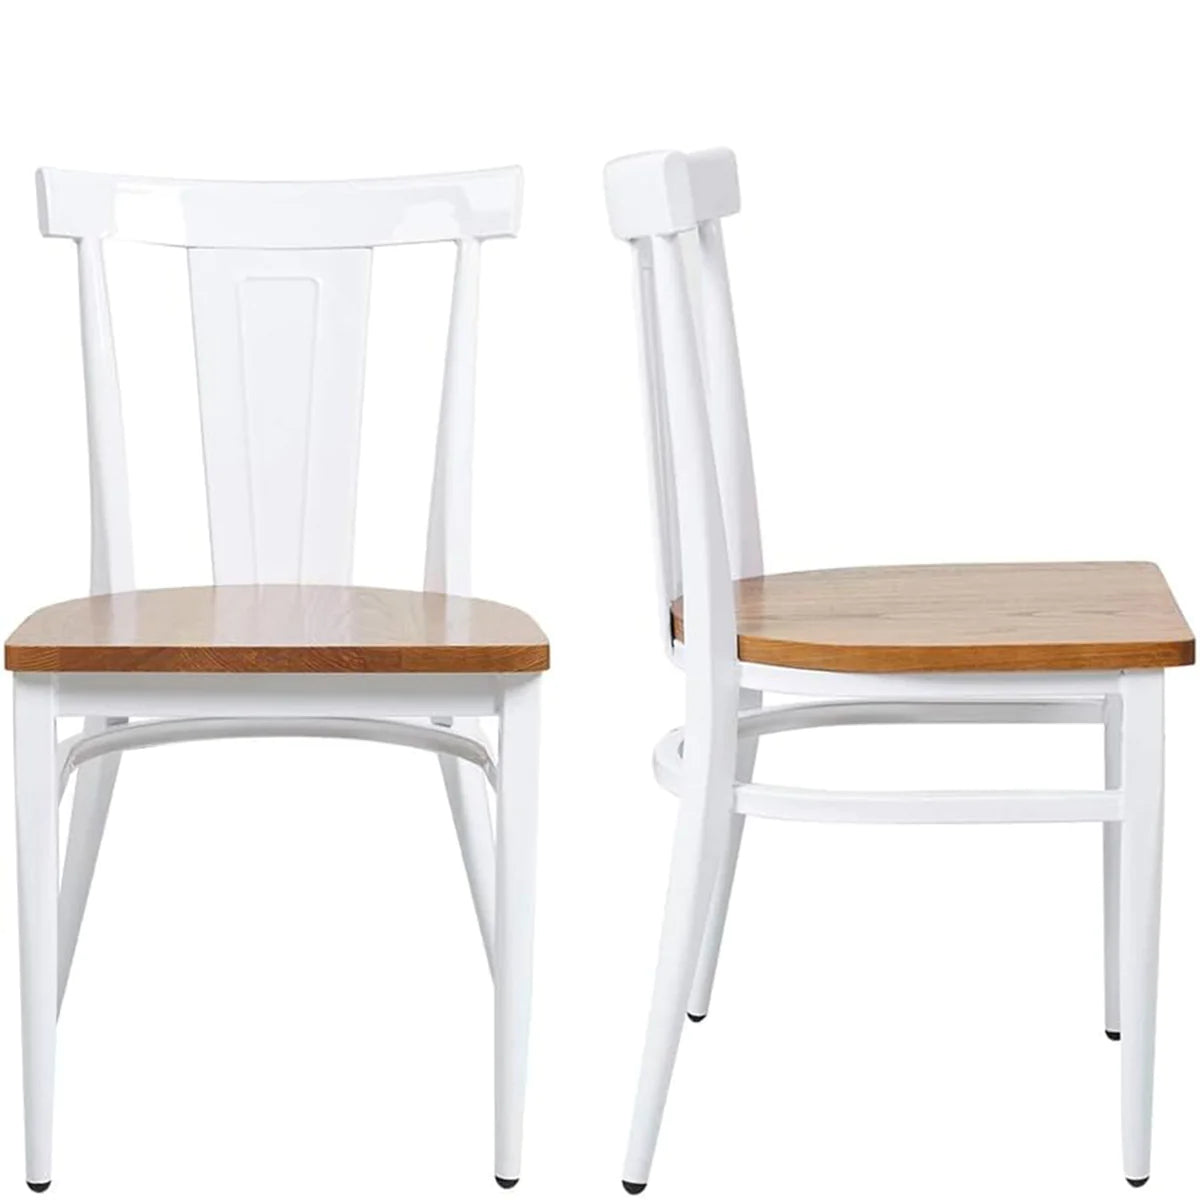 2 Set of Dining Room Side Chair Wood Kitchen Chairs with Metal Legs, Retro Back